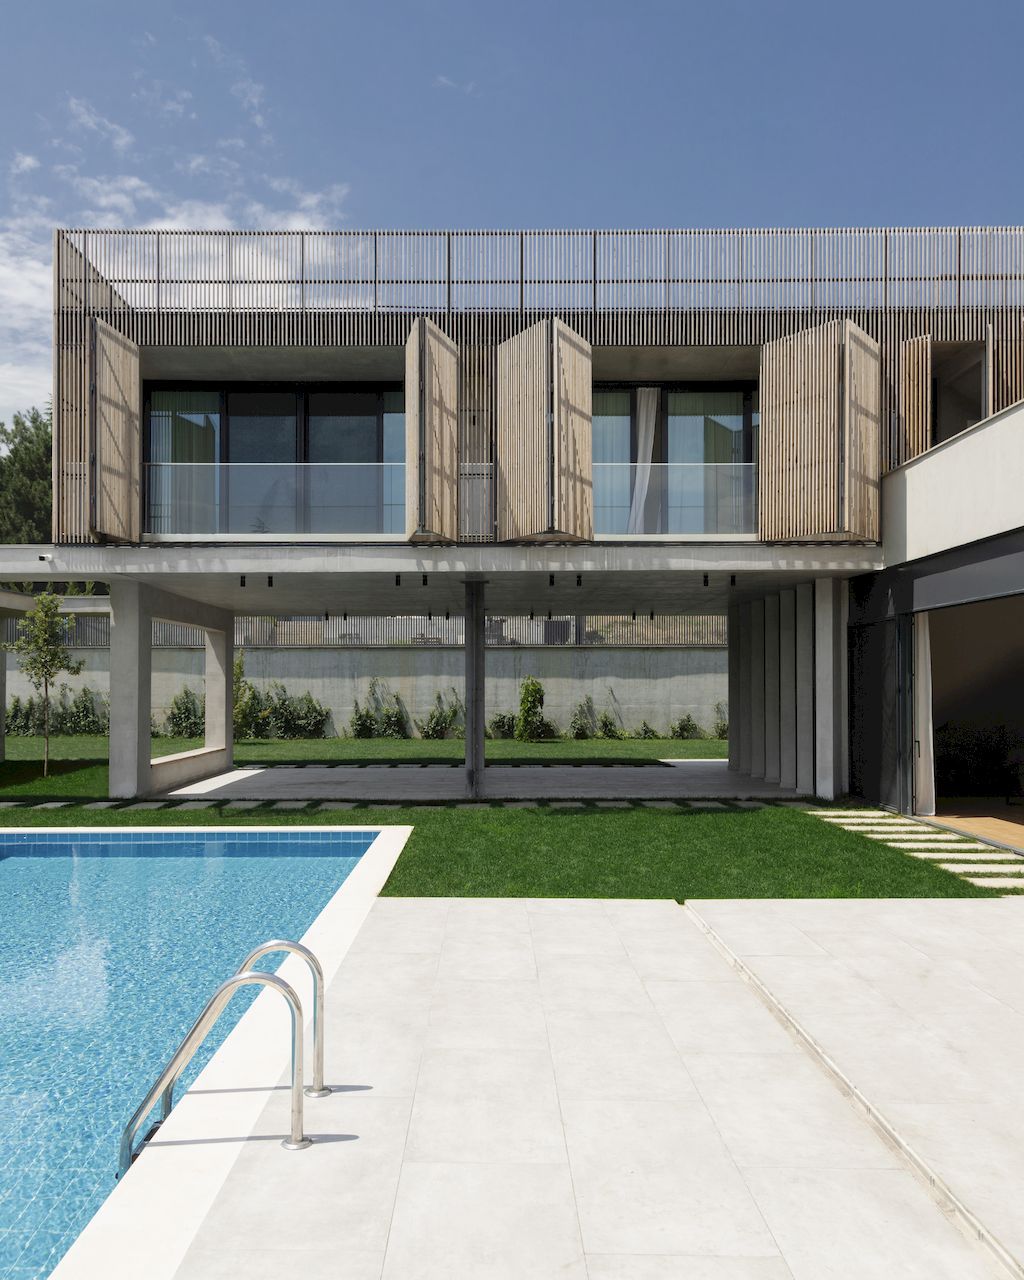 House Around the Tree, Harmony of Modern Design and Nature by TIMM